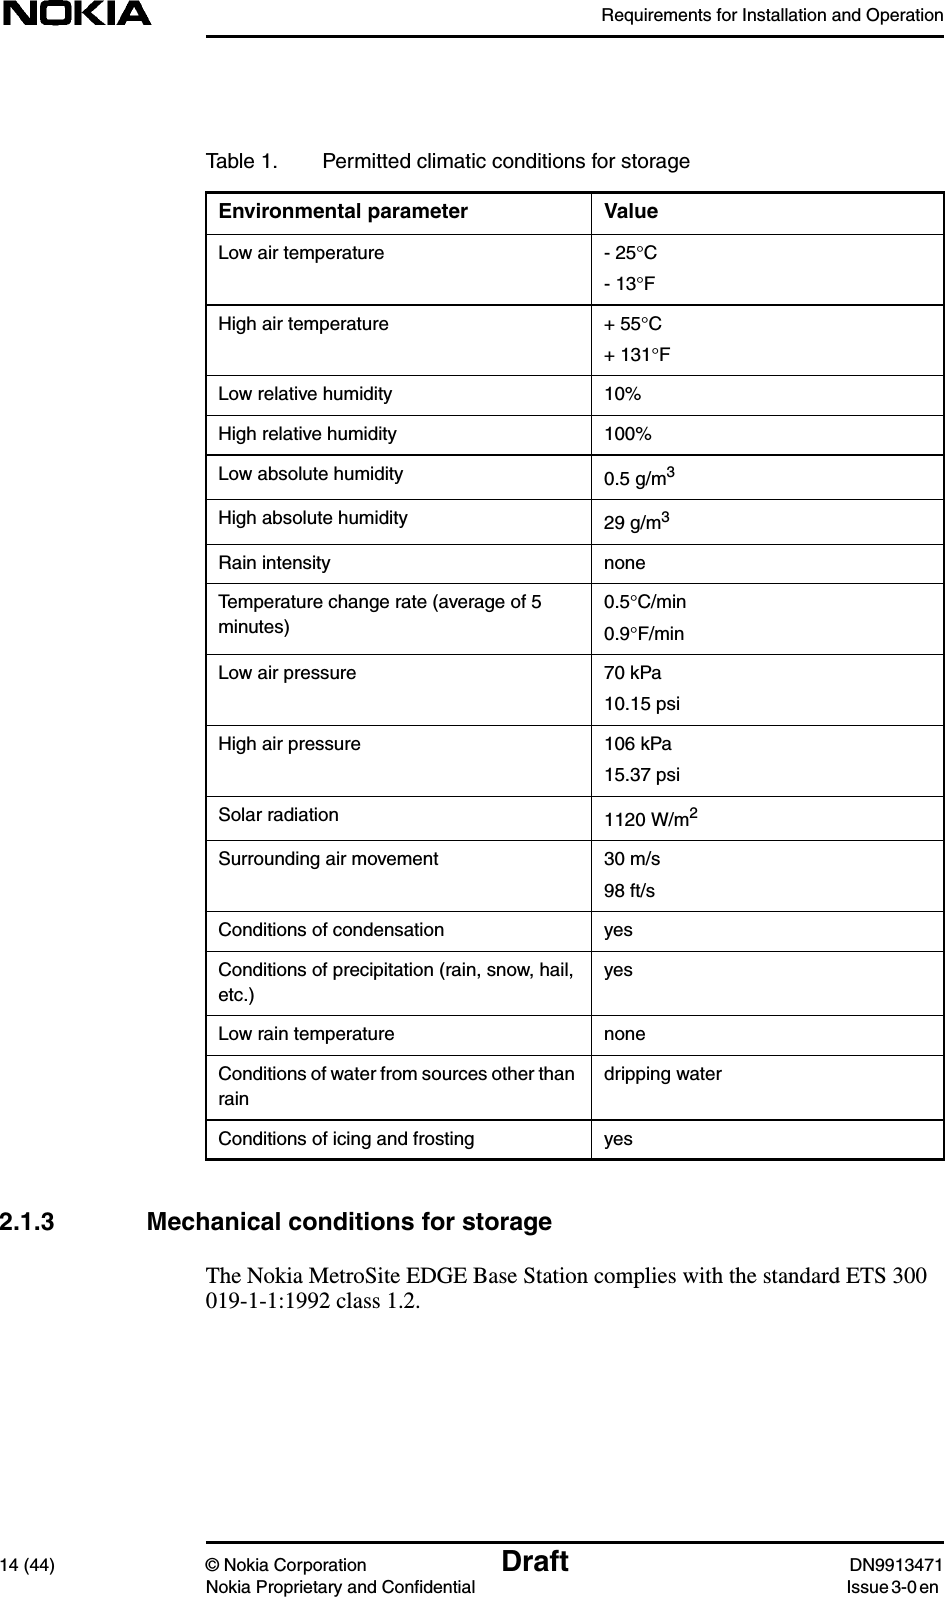 Requirements for Installation and Operation14 (44) © Nokia Corporation Draft DN9913471Nokia Proprietary and Confidential Issue 3-0 en2.1.3 Mechanical conditions for storageThe Nokia MetroSite EDGE Base Station complies with the standard ETS 300019-1-1:1992 class 1.2.Table 1. Permitted climatic conditions for storageEnvironmental parameter ValueLow air temperature - 25°C- 13°FHigh air temperature + 55°C+ 131°FLow relative humidity 10%High relative humidity 100%Low absolute humidity 0.5 g/m3High absolute humidity 29 g/m3Rain intensity noneTemperature change rate (average of 5minutes)0.5°C/min0.9°F/minLow air pressure 70 kPa10.15 psiHigh air pressure 106 kPa15.37 psiSolar radiation 1120 W/m2Surrounding air movement 30 m/s98 ft/sConditions of condensation yesConditions of precipitation (rain, snow, hail,etc.)yesLow rain temperature noneConditions of water from sources other thanraindripping waterConditions of icing and frosting yes